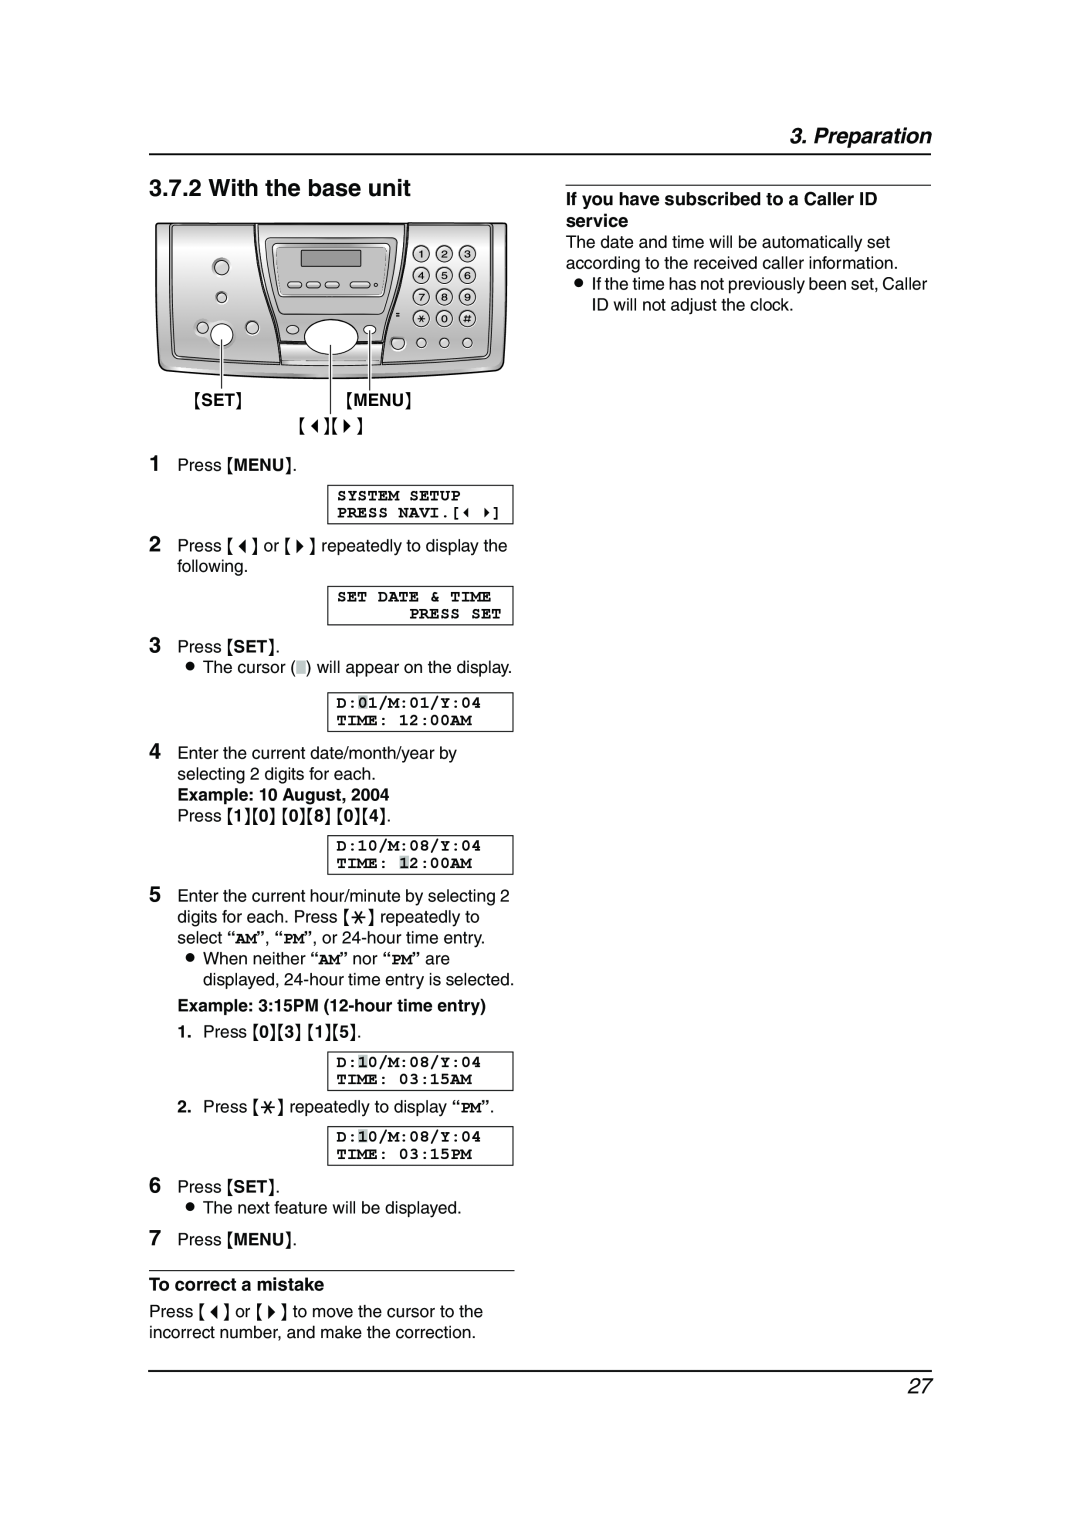 Panasonic KX-FC241AL With the base unit, Menu, Example 10 August, 2004 Press 10 08, Preparation, To correct a mistake 